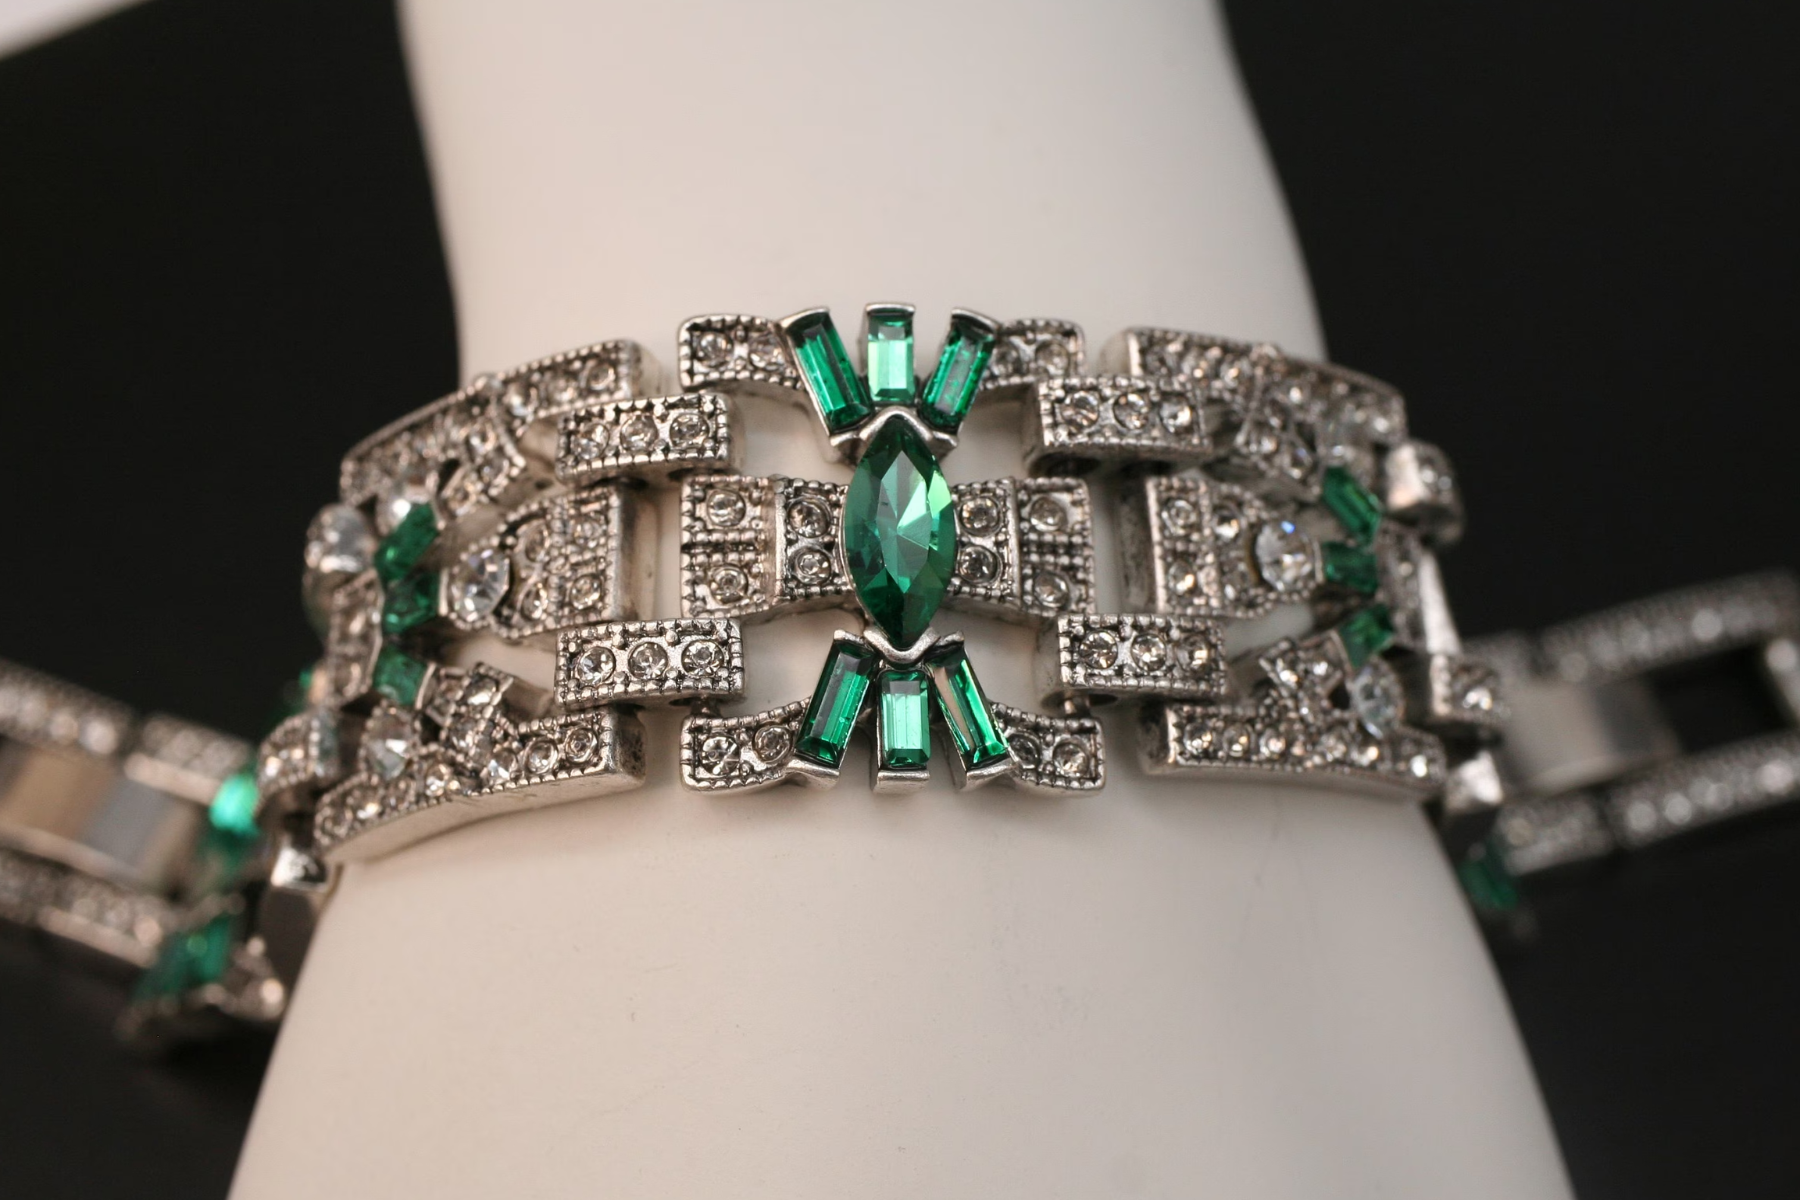 A white woman's hand holding a retro-style bracelet with green stones